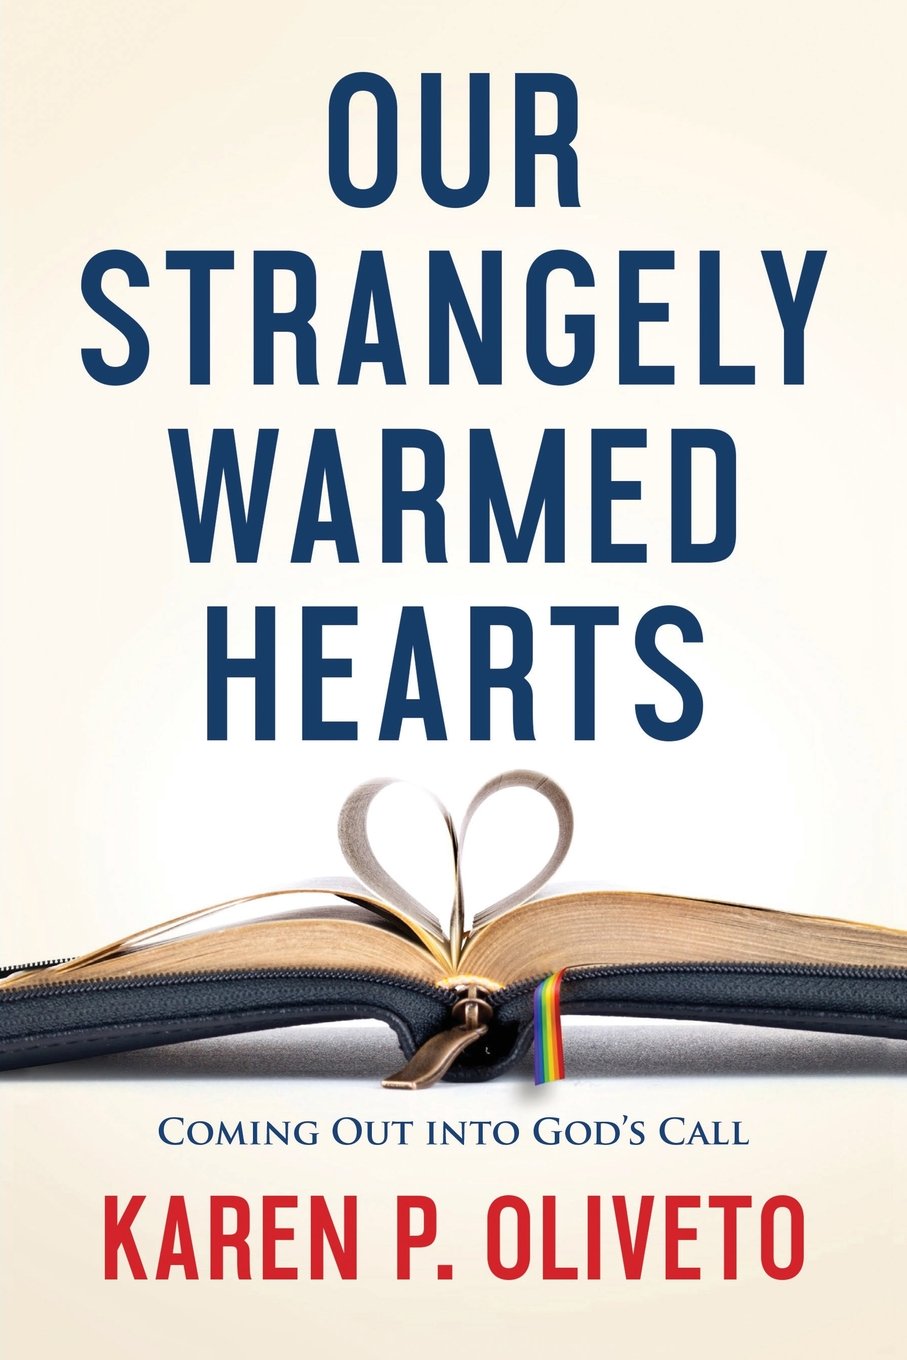 Bishop Karen P. Oliveto’s book, “Our Strangely Warmed Hearts: Coming Out Into God’s Call.” 